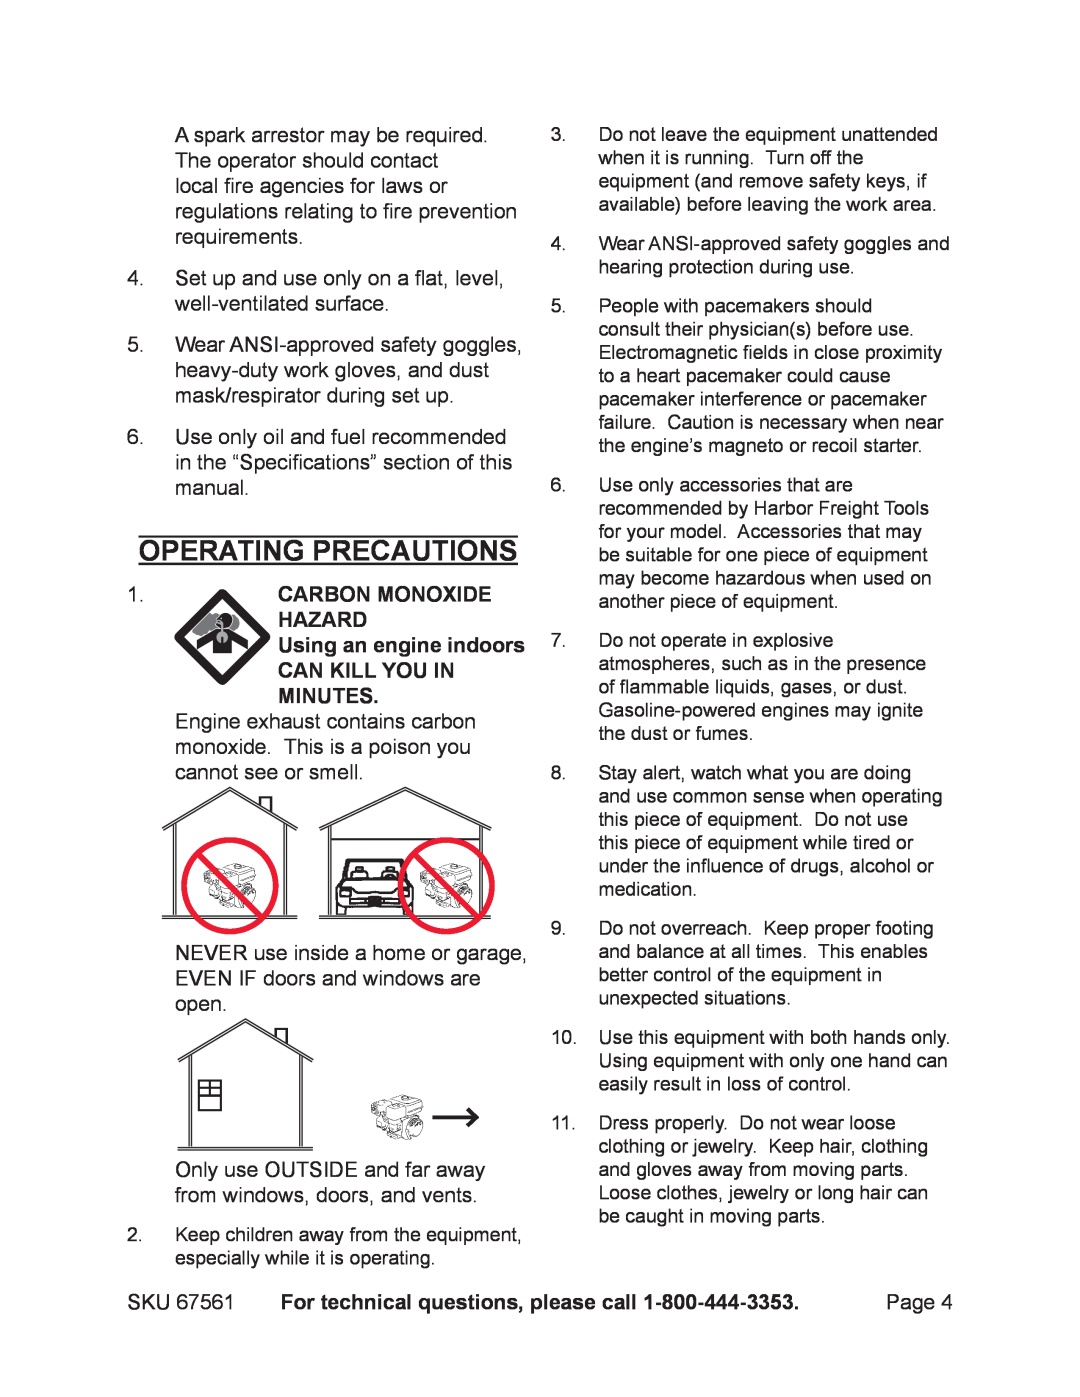 Chicago Electric 67561 Operating precautions, Carbon Monoxide Hazard Using an engine indoors, Can Kill You In Minutes 